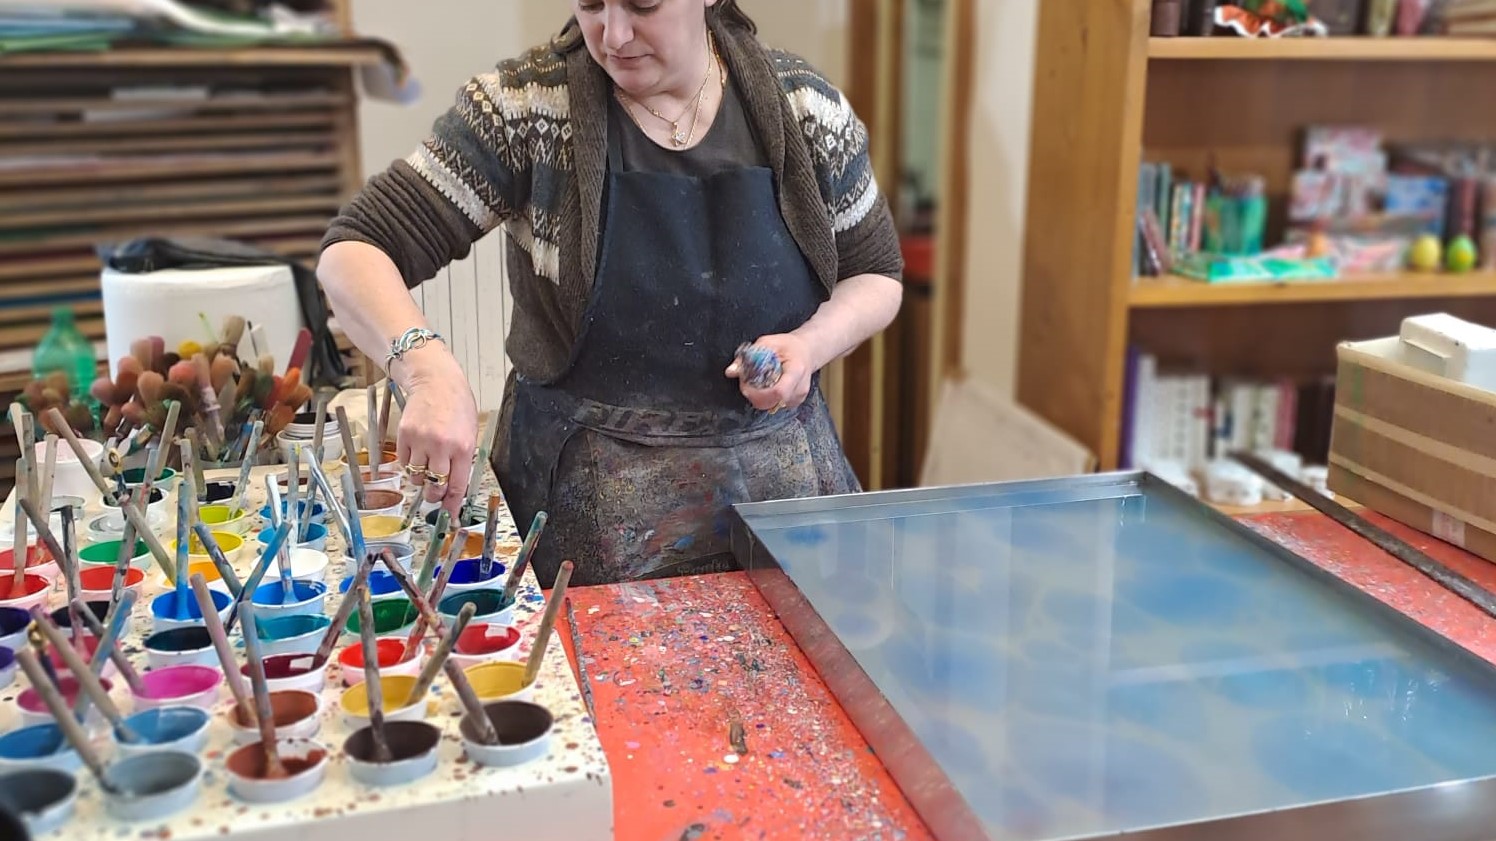 An artisan is creating some marbled paper in her shop in Florence